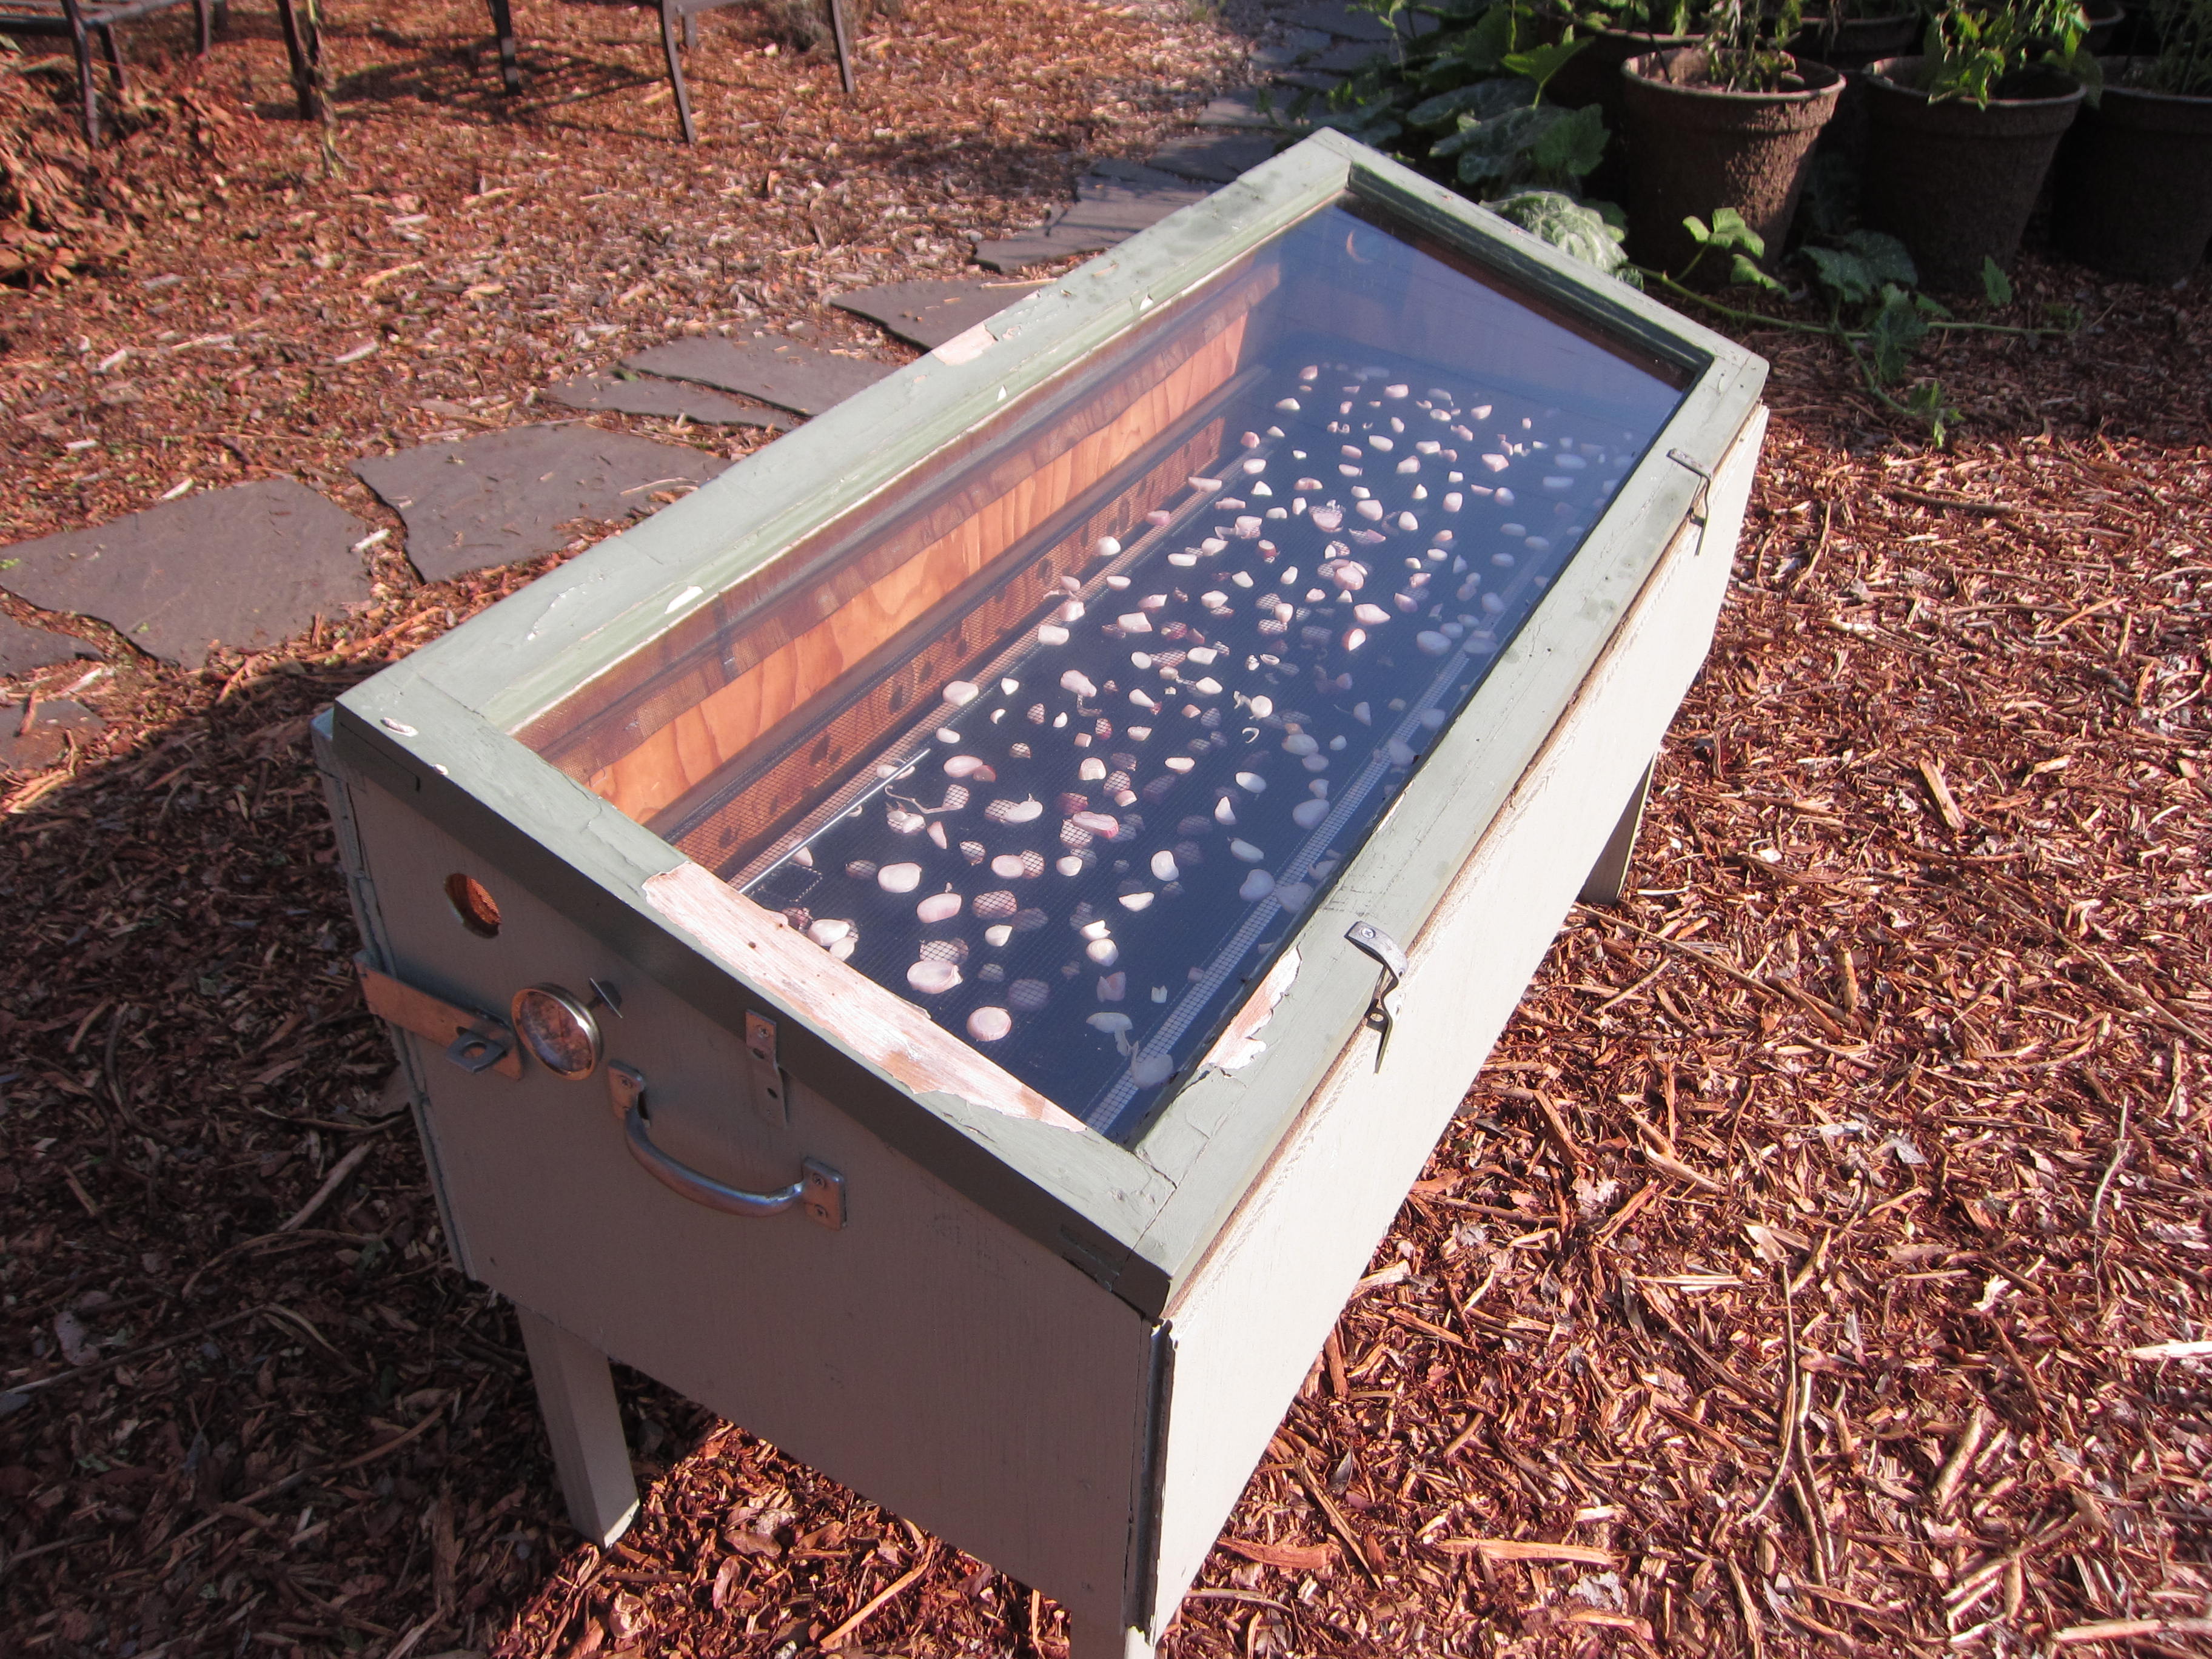 Our solar food dryer in action. 